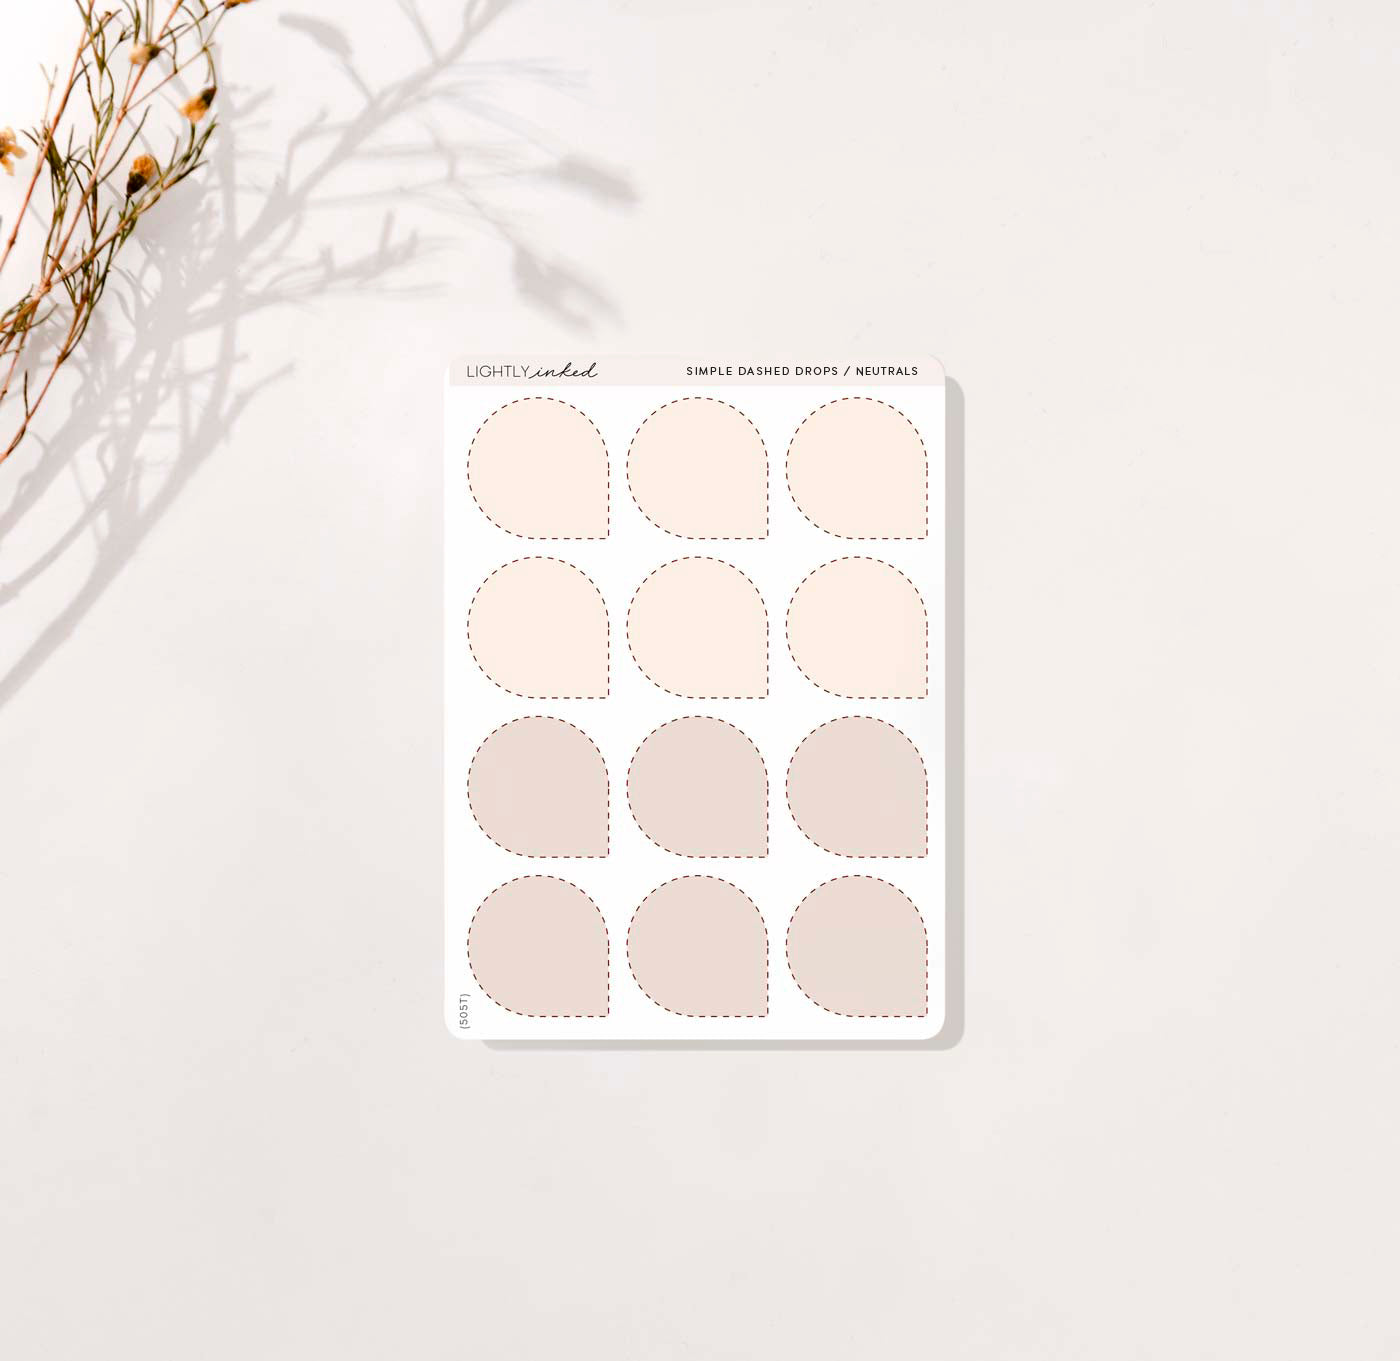 Simple Dashed Drops / Neutrals